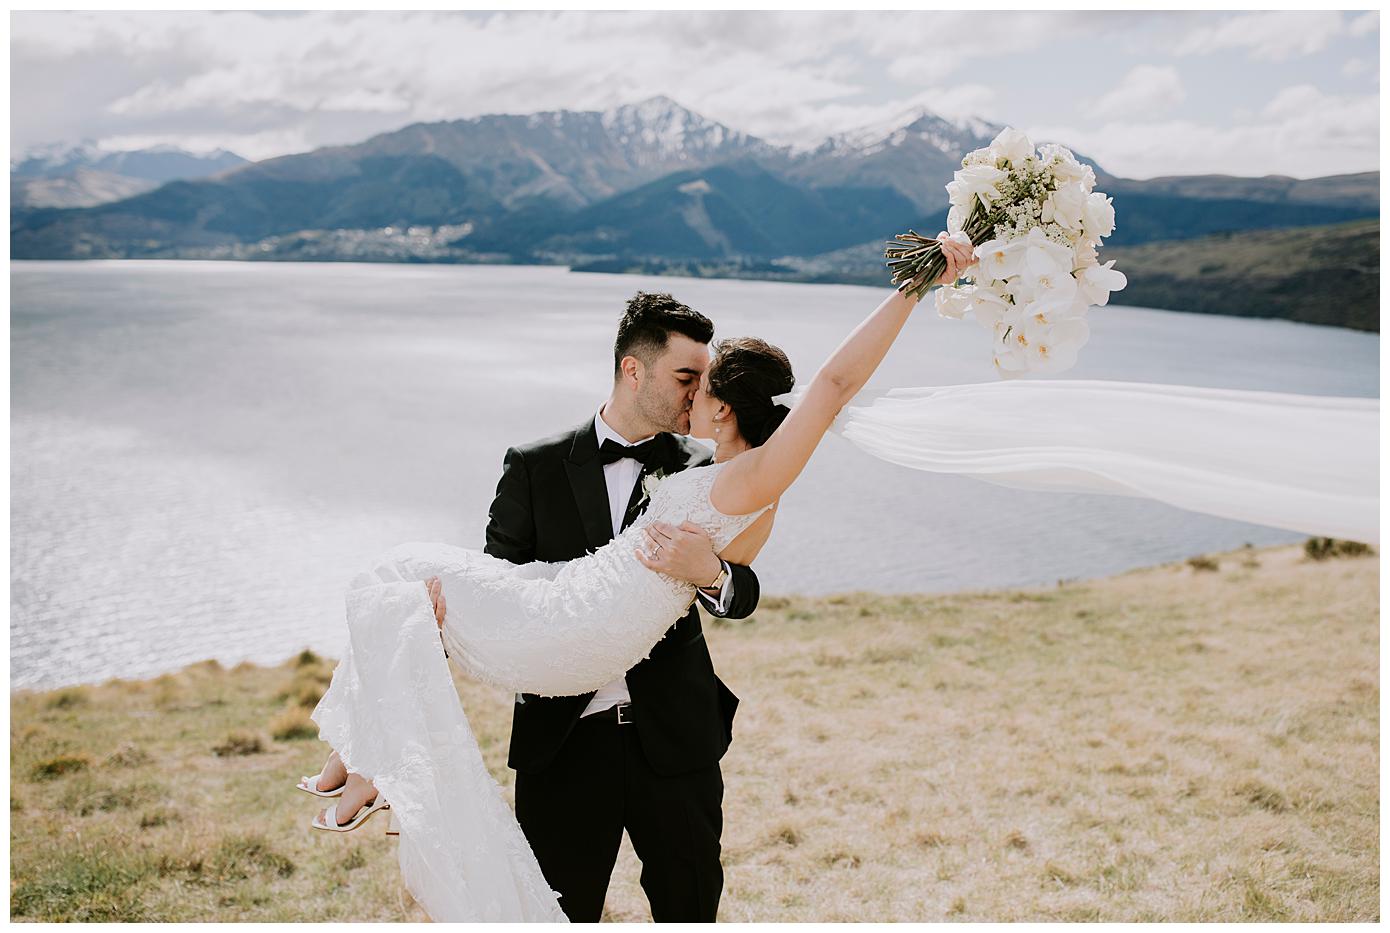 Charlotte Kiri Photography - Elopement Photography of groom wearing black tuxedo suit who is lifting up his bride who is wearing a lovely lace dress with long sheer veil that is floating in the wind, in front of a pictureque backdrop of lakes and mountains at Jack's retreat in Queenstown, New Zealand